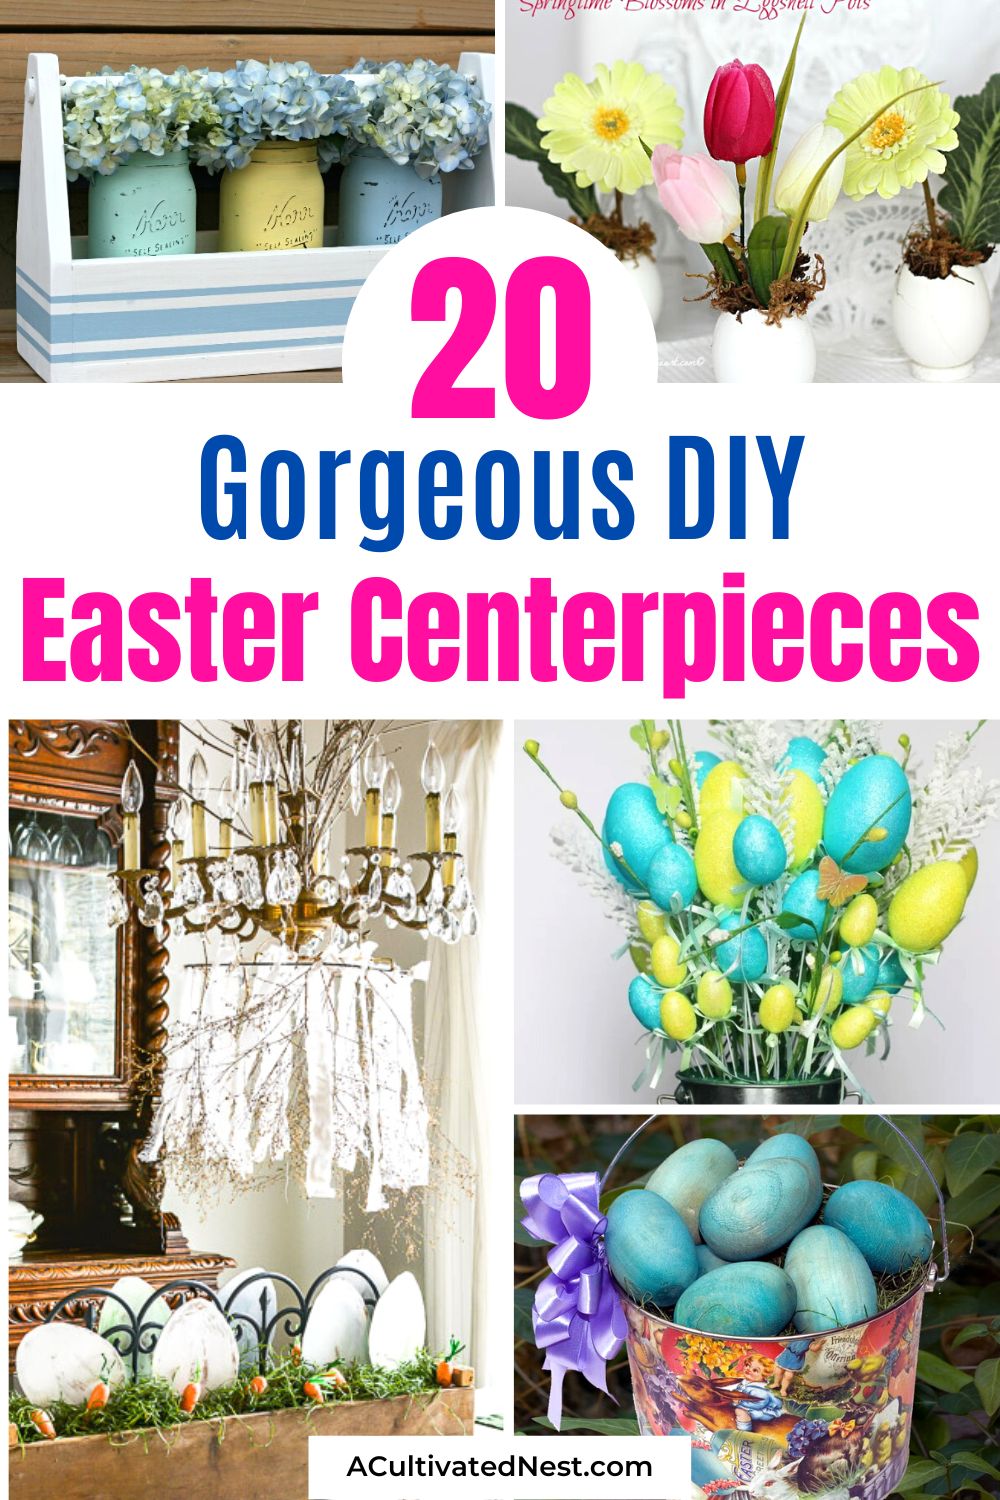 20 DIY Easter Centerpieces to Spruce Up Your Table- Hop into Easter with these adorable DIY Easter centerpieces! Whether you prefer chic or whimsical, these gorgeous centerpiece ideas will make your table shine. | #easterDIY #EasterCrafts #crafts #diyProjcts #ACultivatedNest